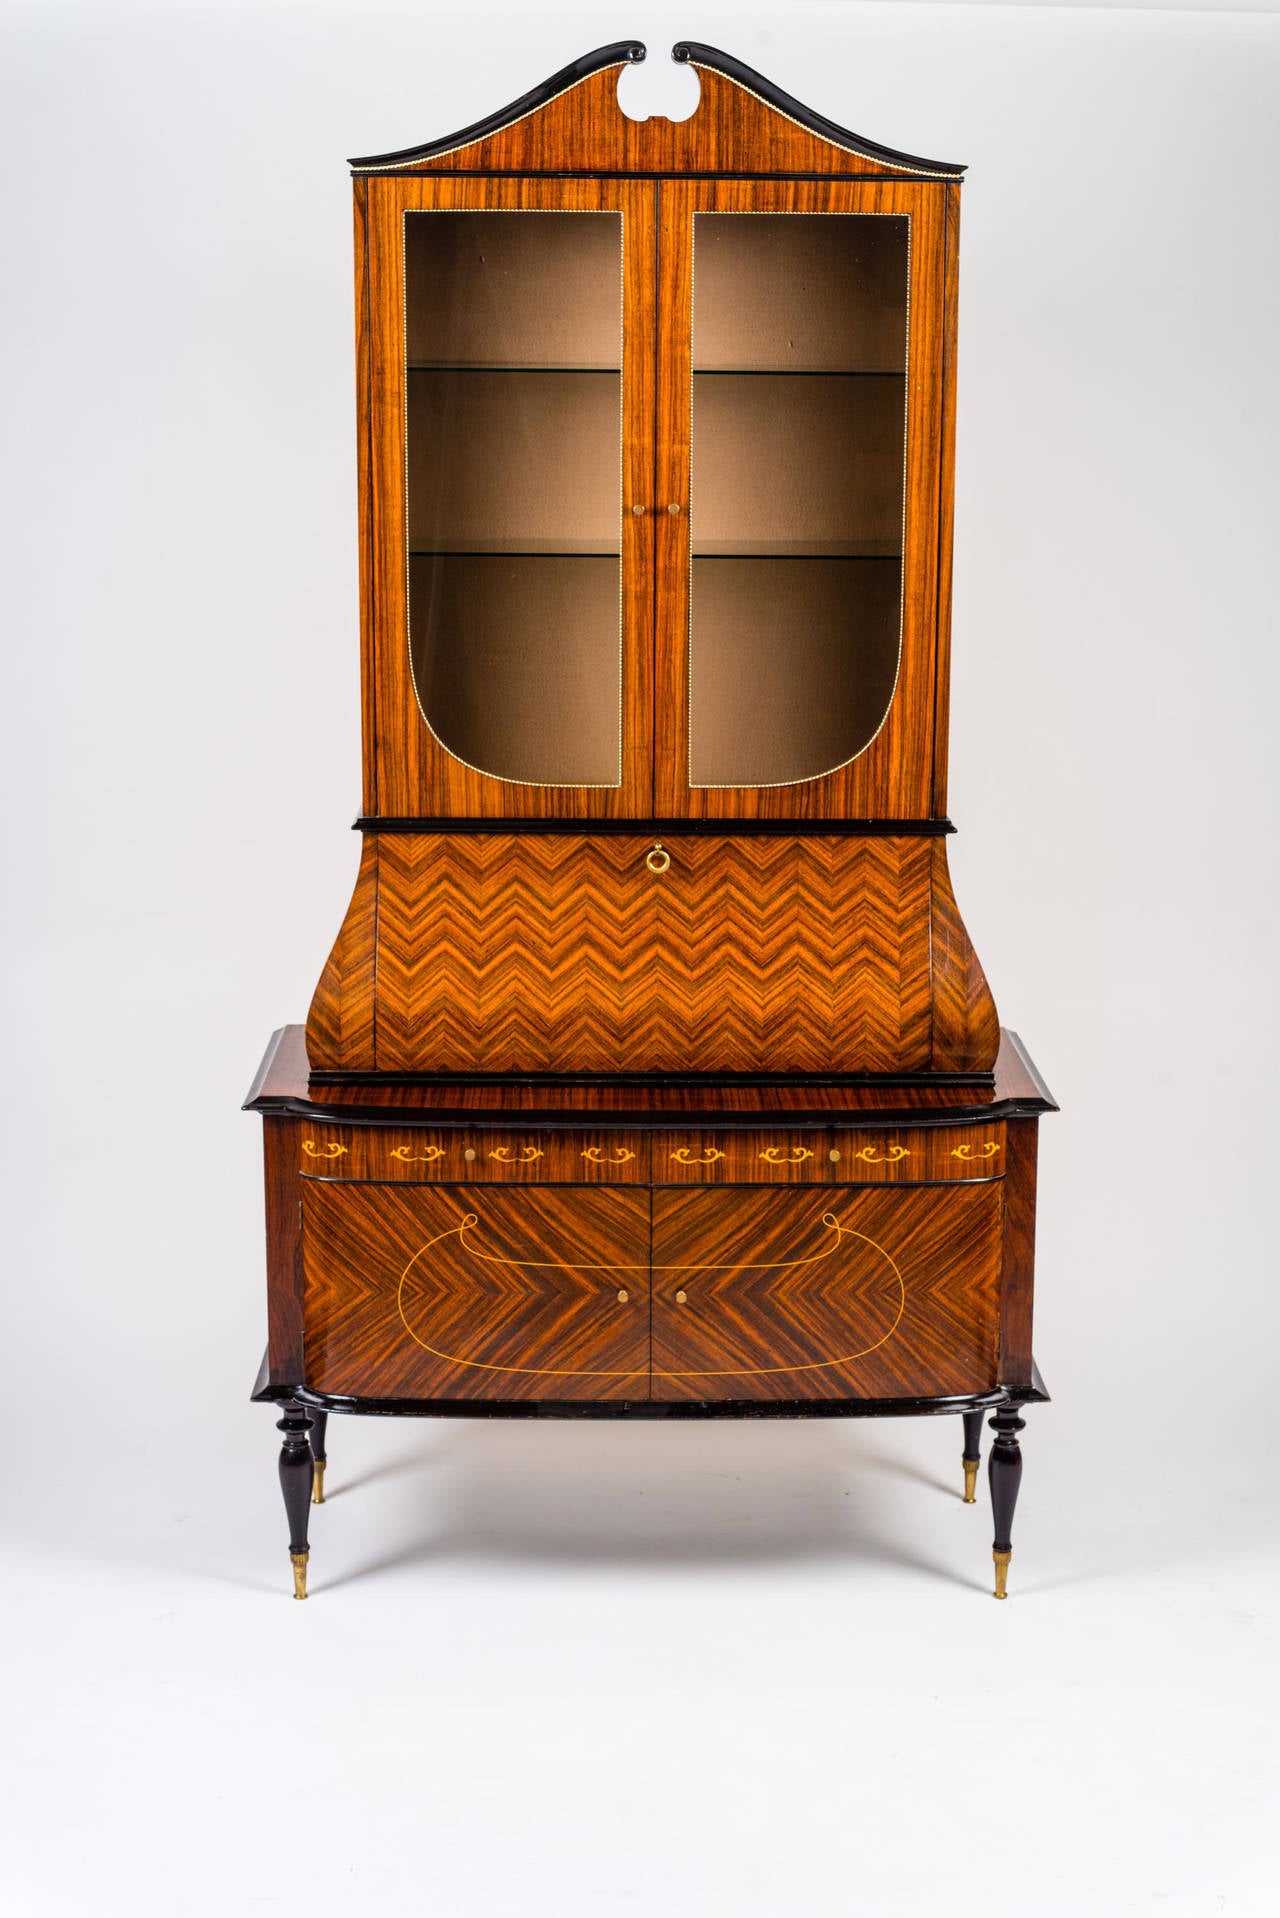 The upper floor has two glass doors and a folding shaped usable as dry bar. In the lower part there are two doors and rounded rock slabs with a beautiful woven inlay rosewood shoes of brass feet. Inlays of pink thread. Cabinet of refined presence.